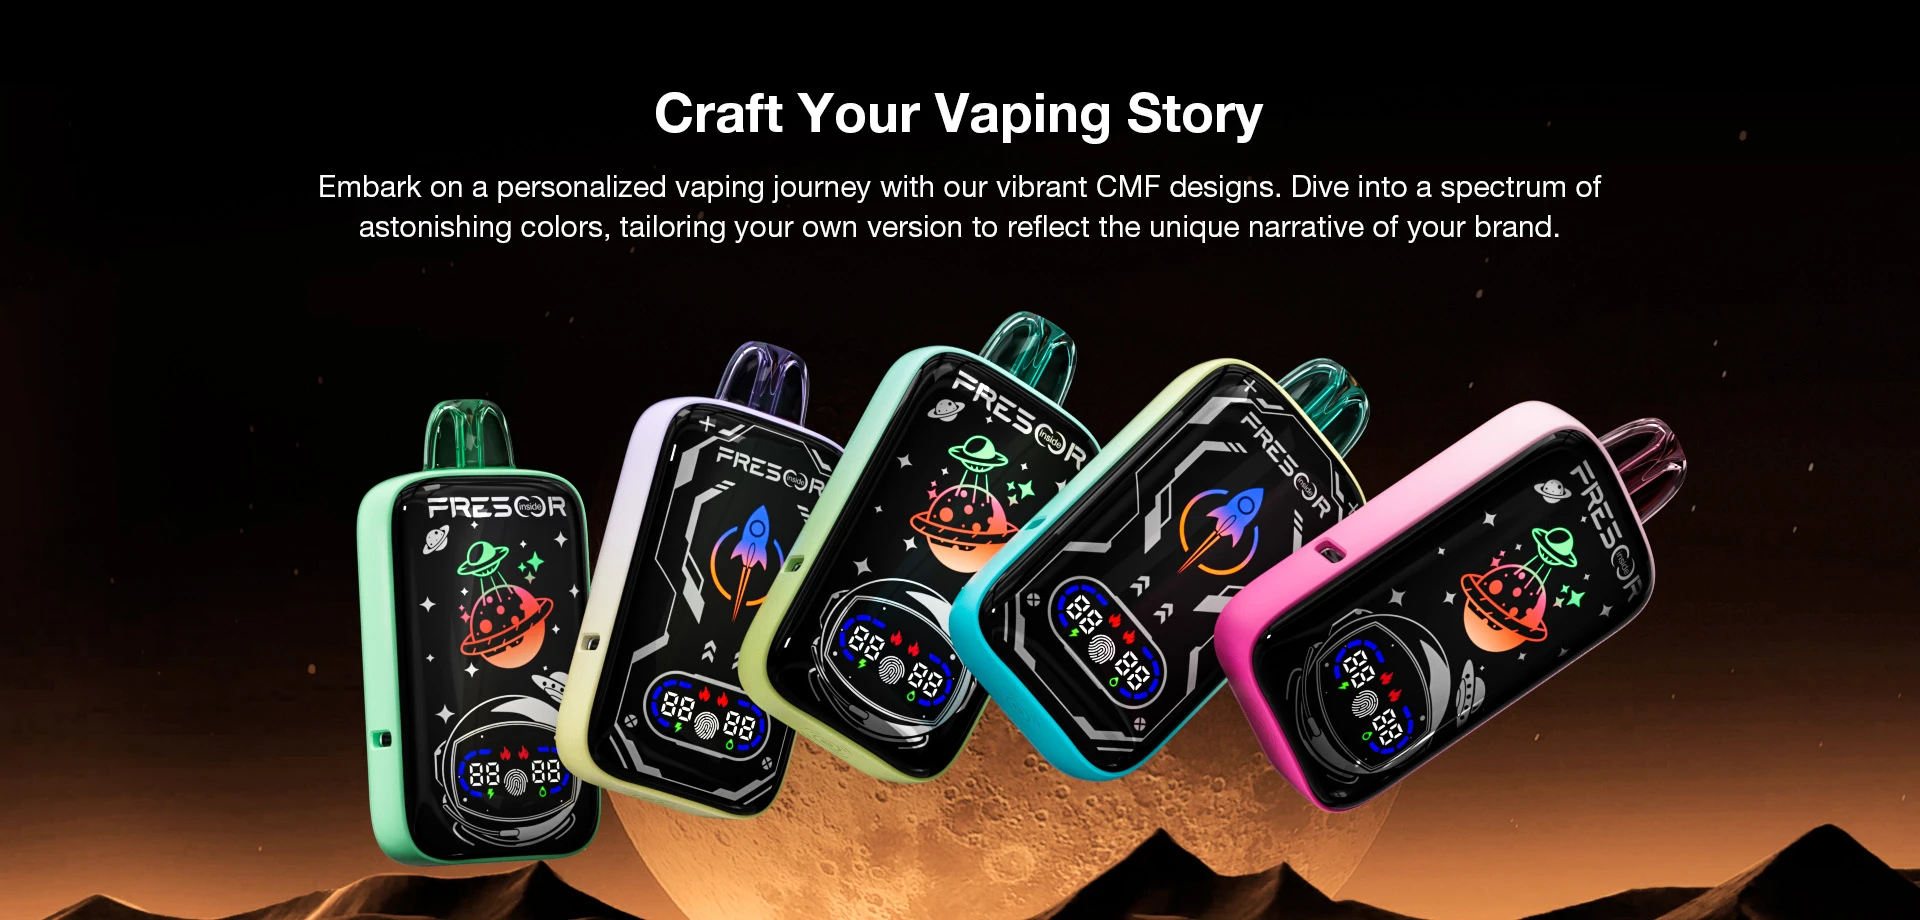 Craft Your Vaping Story Embark on a personalized vaping journey with our vibrant CMF designs. Dive into a spectrum of astonishing colors, tailoring your own version to reflect the unique narrative of your brand.